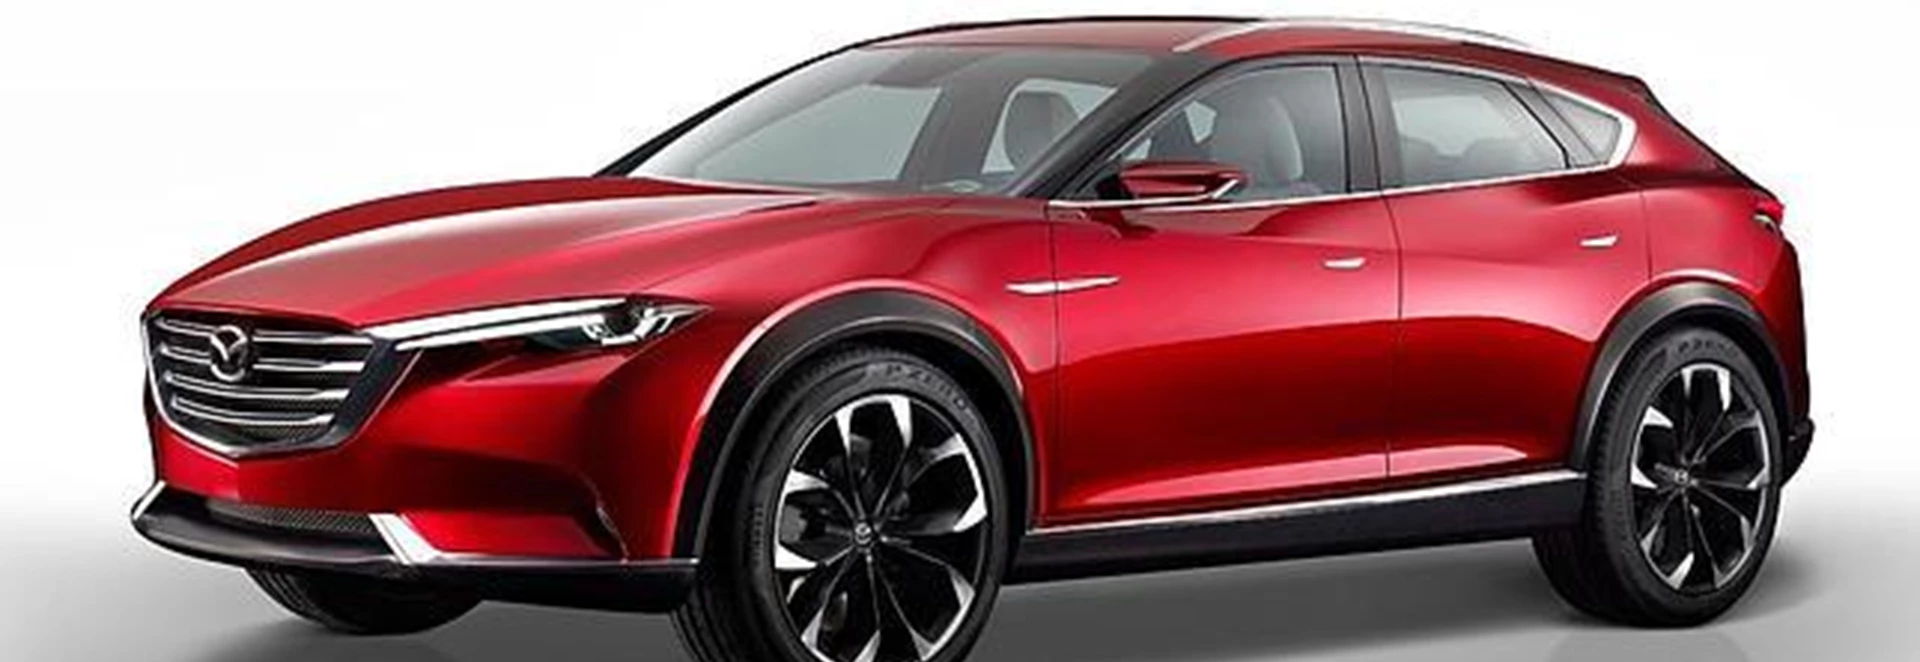 Mazda to debut CX-4 coupe at Beijing